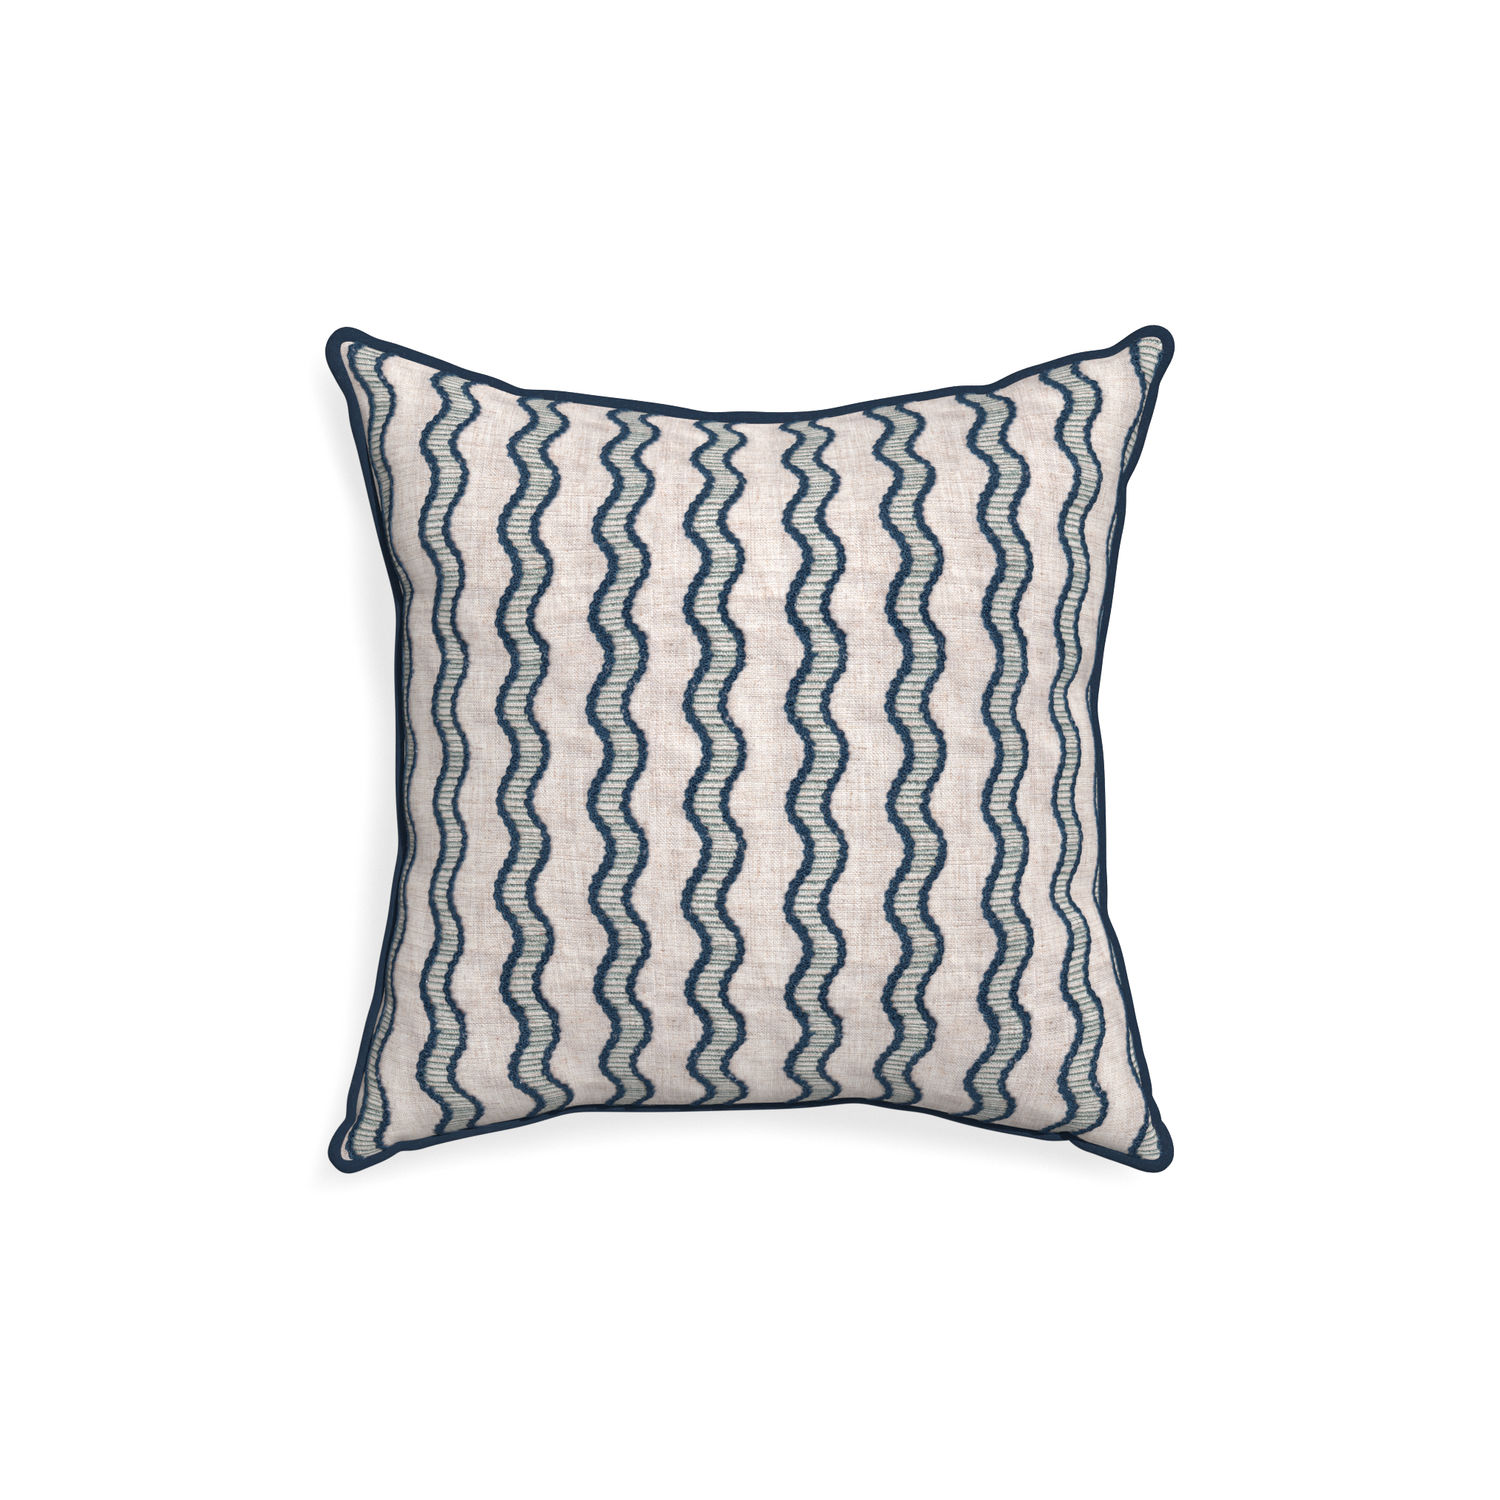 18-square beatrice custom embroidered wavepillow with c piping on white background